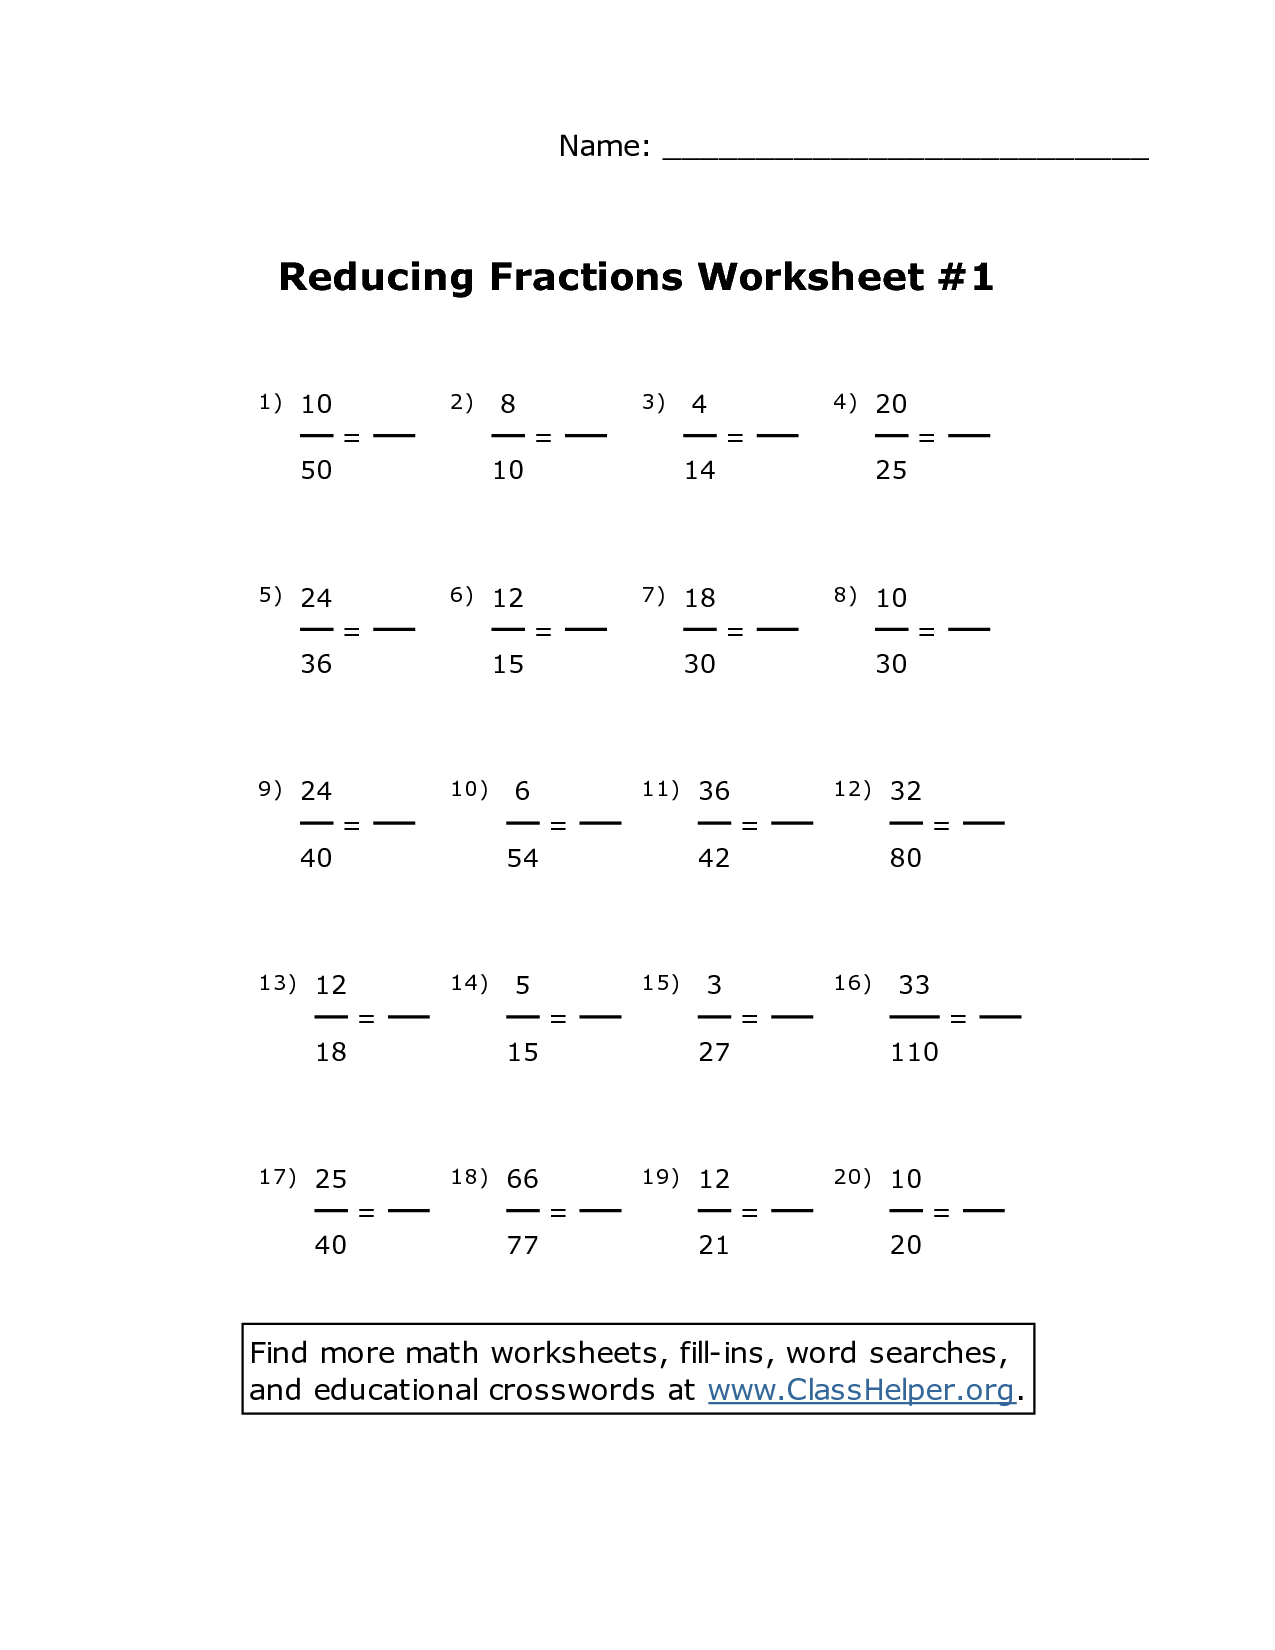 Simplifying Fractions Worksheets For 4th Graders - math worksheets for